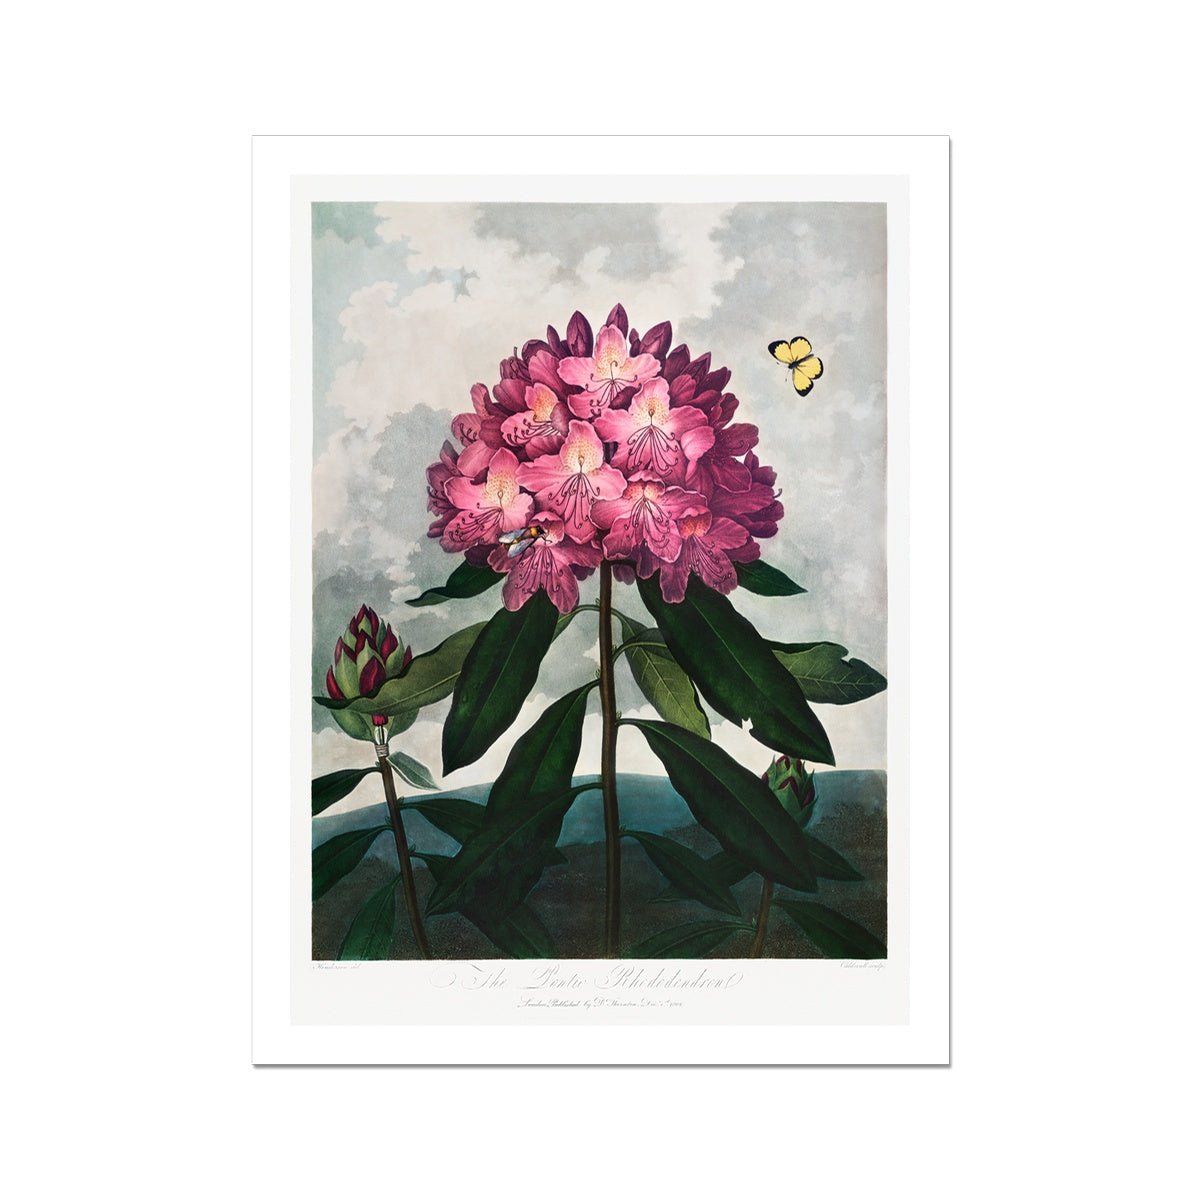 The Pontic Rhododendron from The Temple of Flora (1807) by Robert John Thornton Fine Art Print